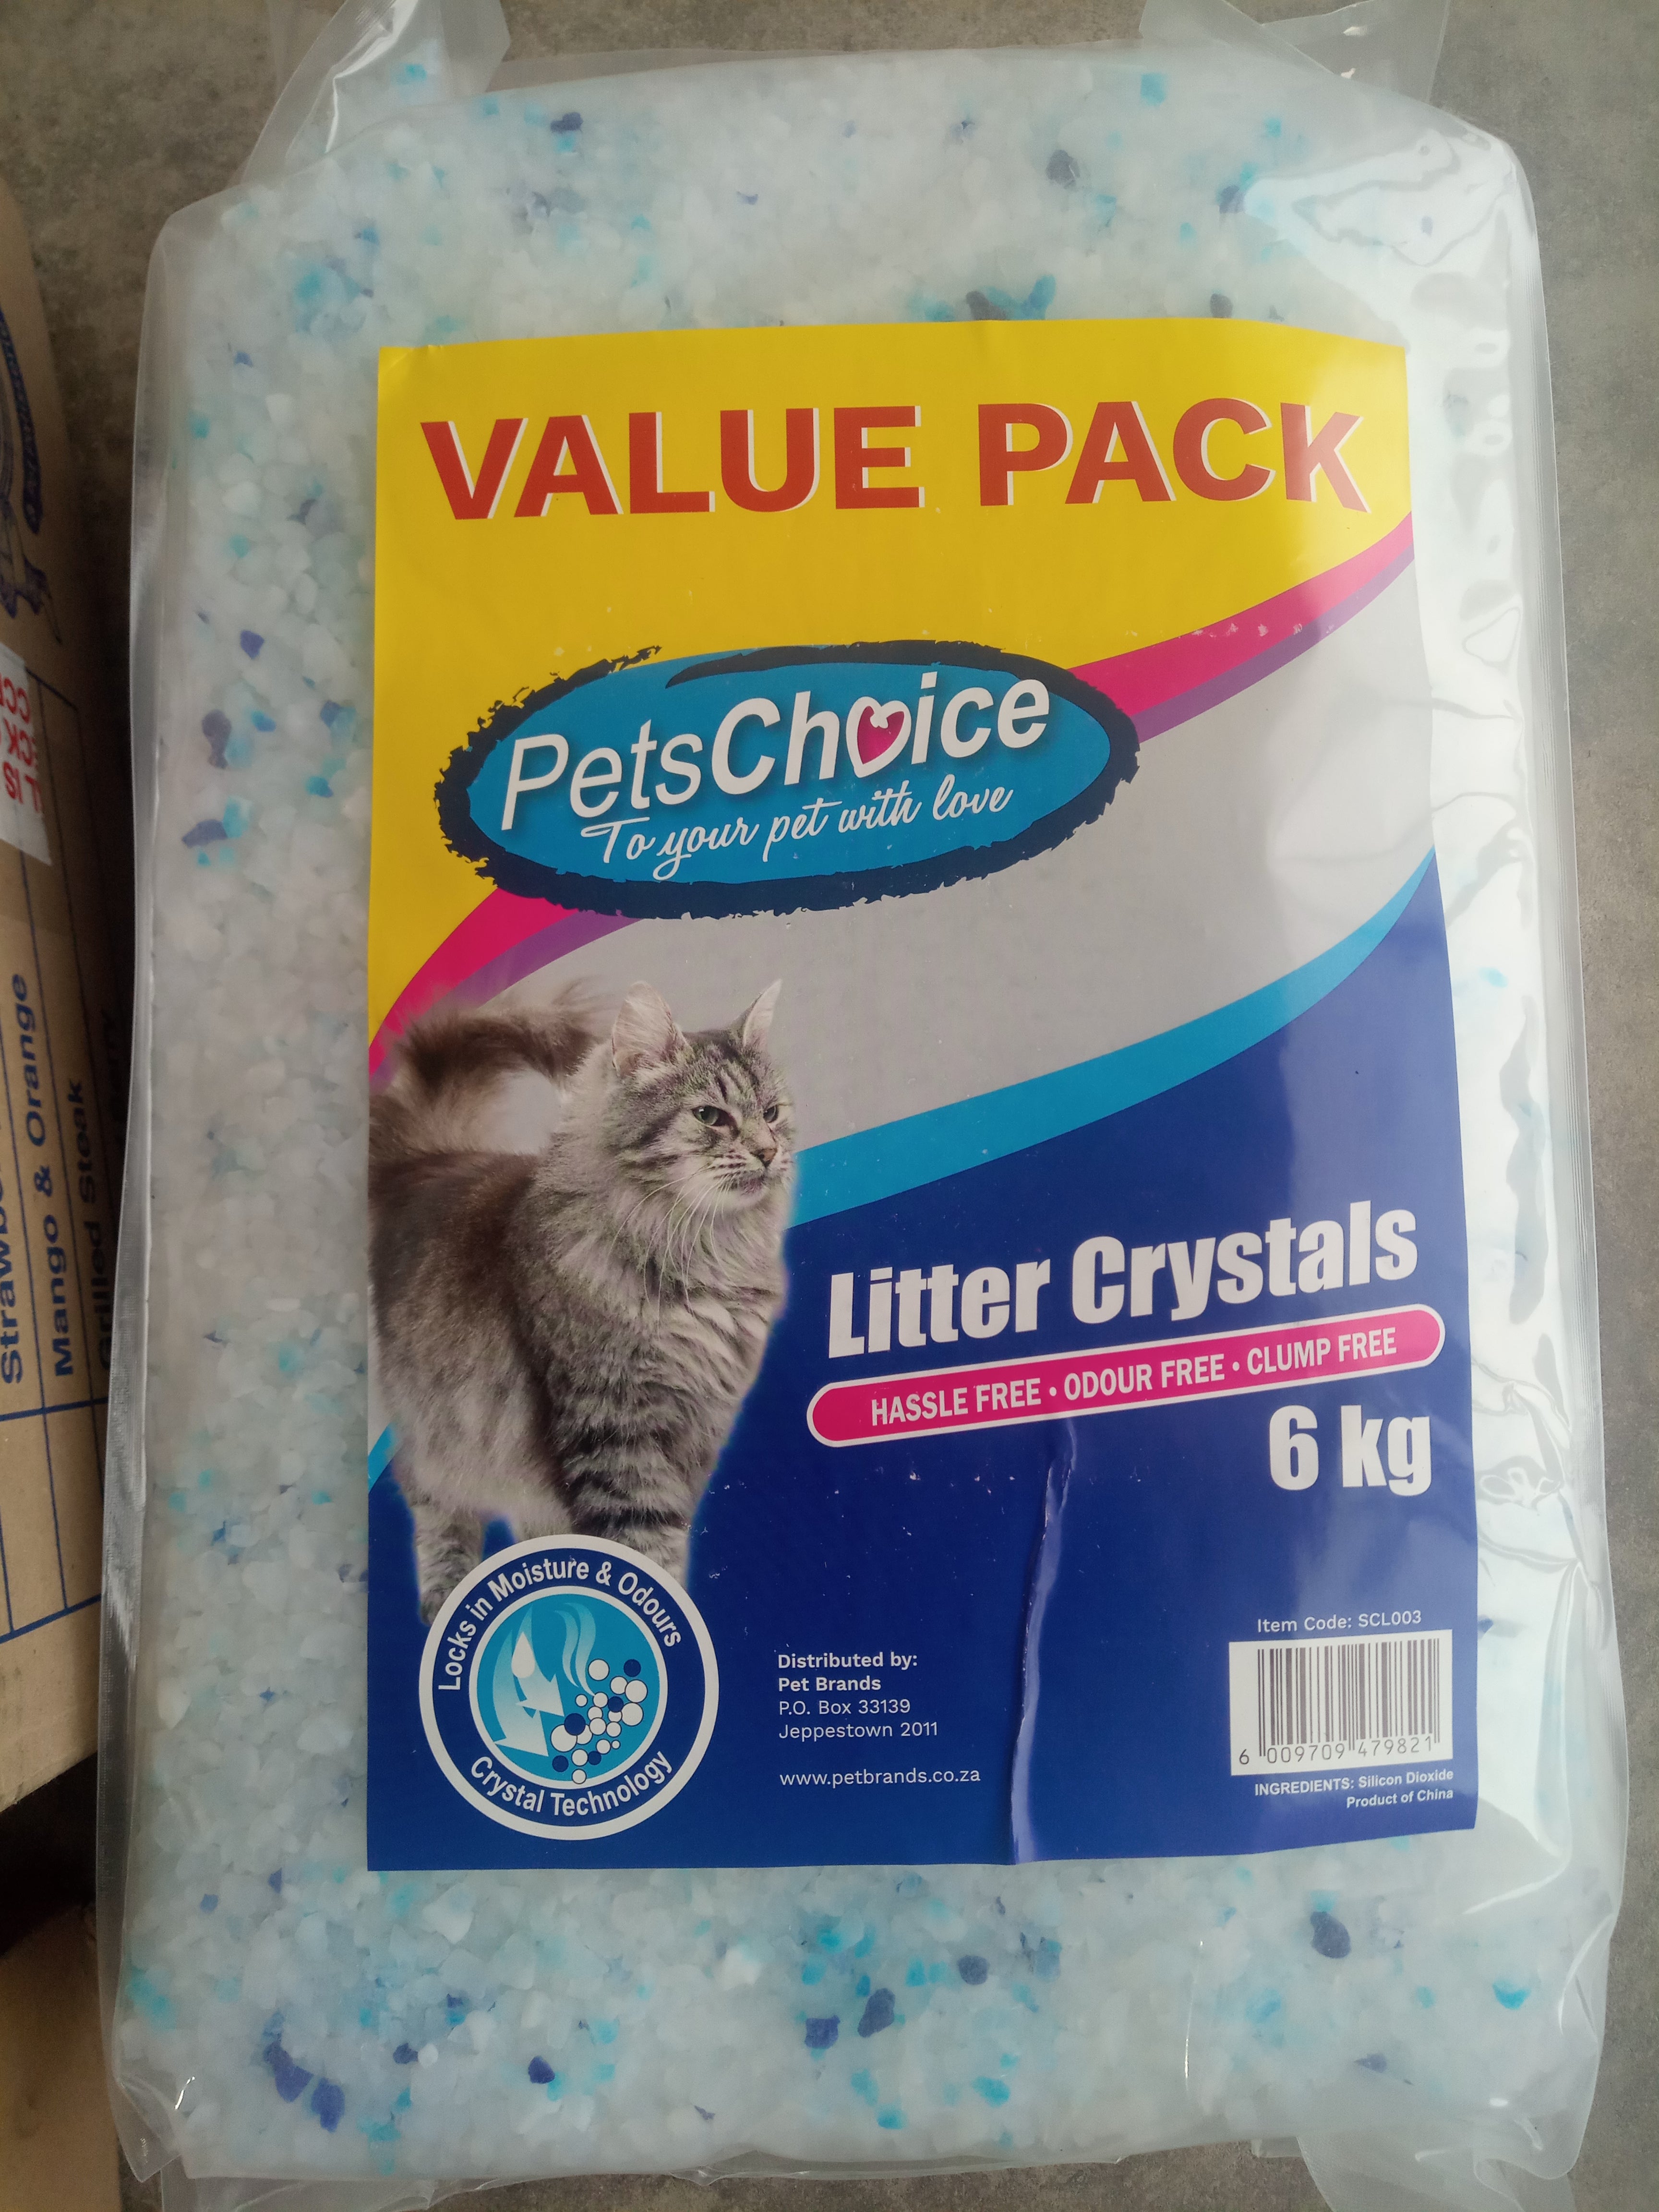 Pets Choice Litter Crystals - 6kg value pack